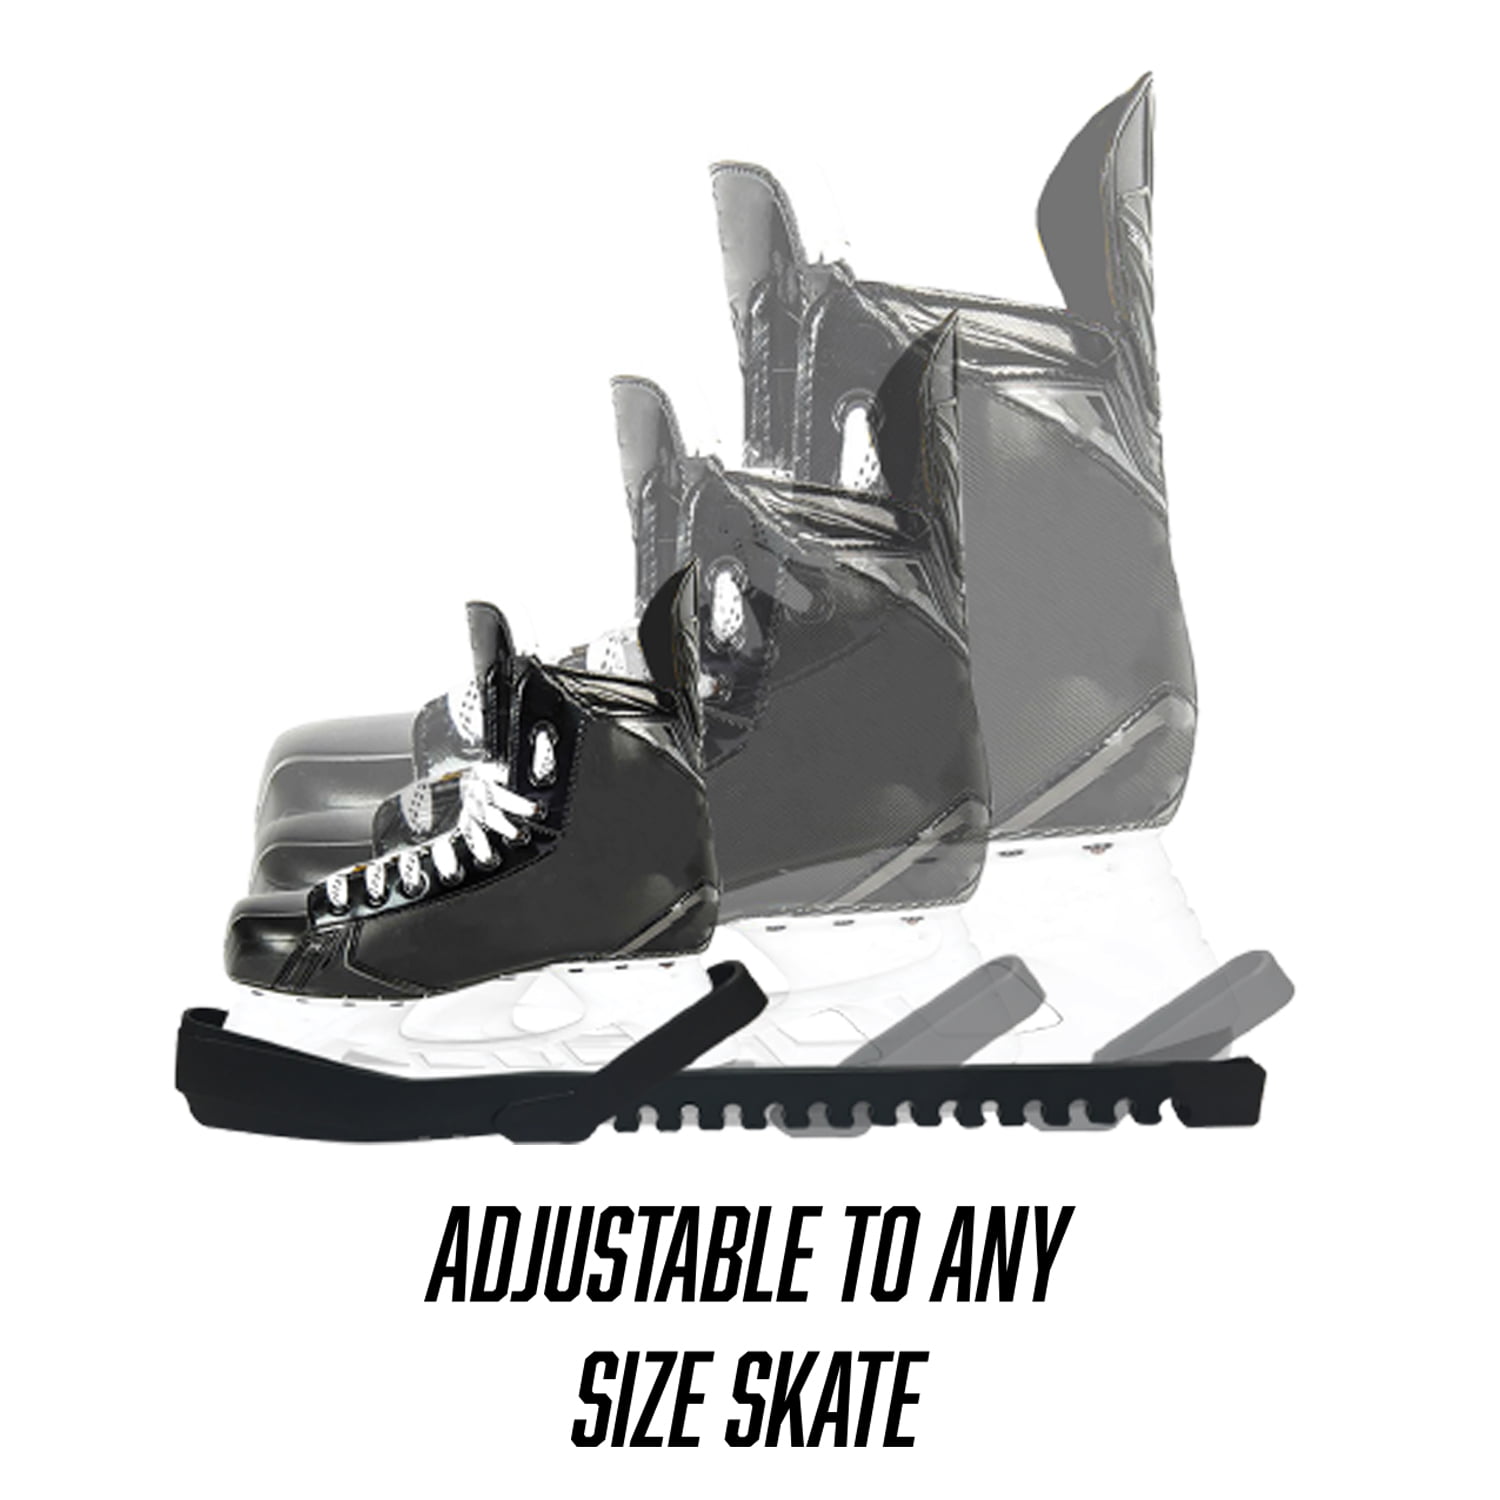 Hockey BladeGards Skate Guard Drain Holes 1 Size Fits All With Adjustable Strap for sale online 